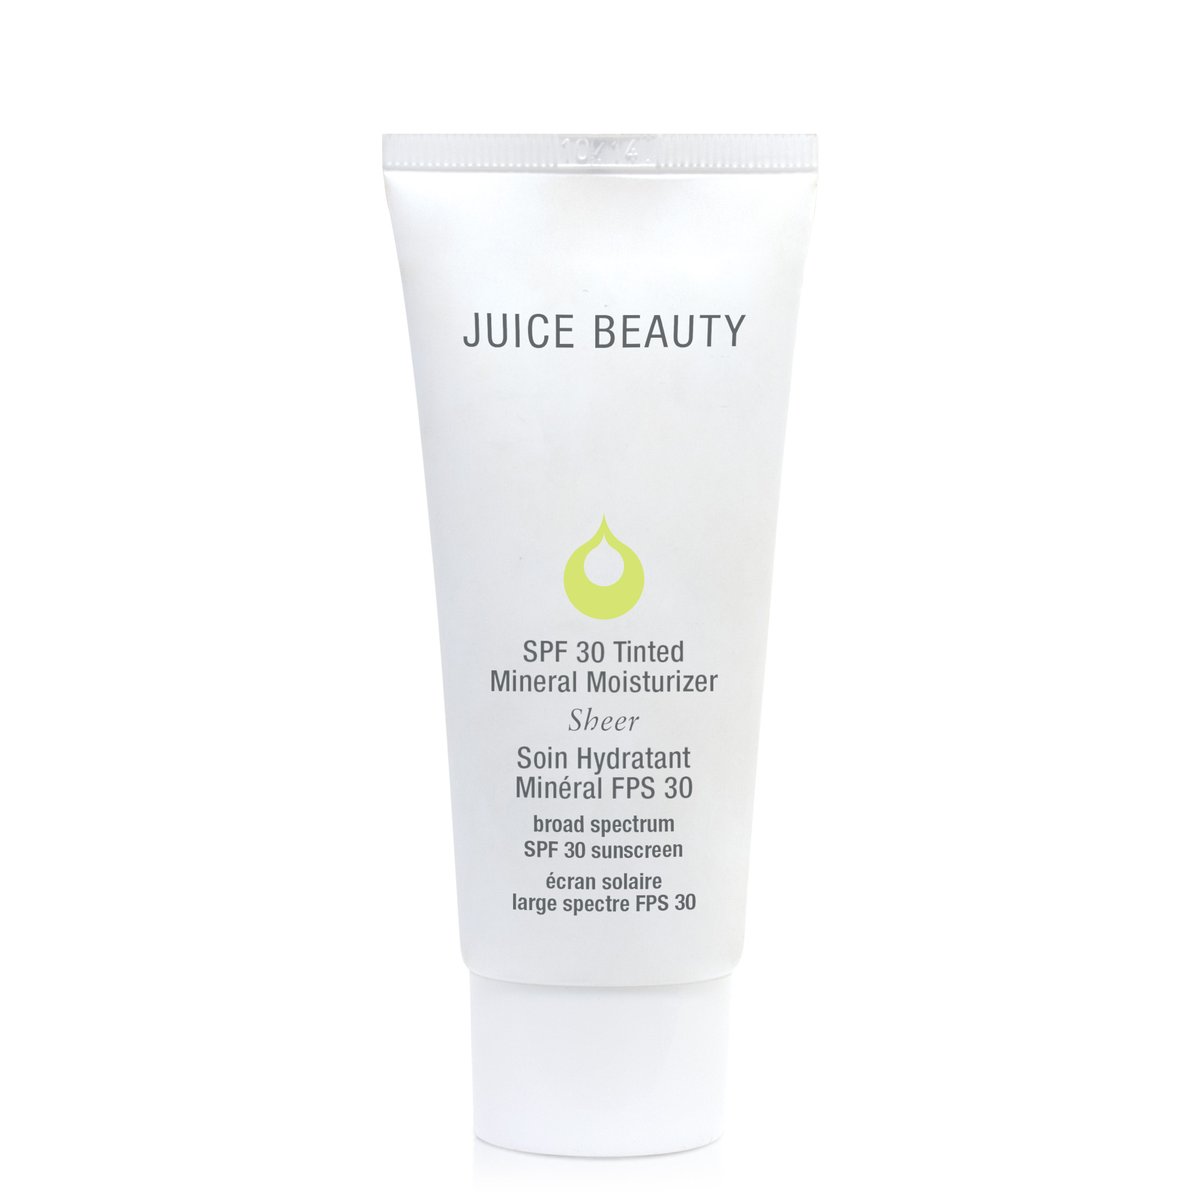 Juice Beauty SPF 30 Tinted Mineral Moisturizer - clean tinted moisturizer